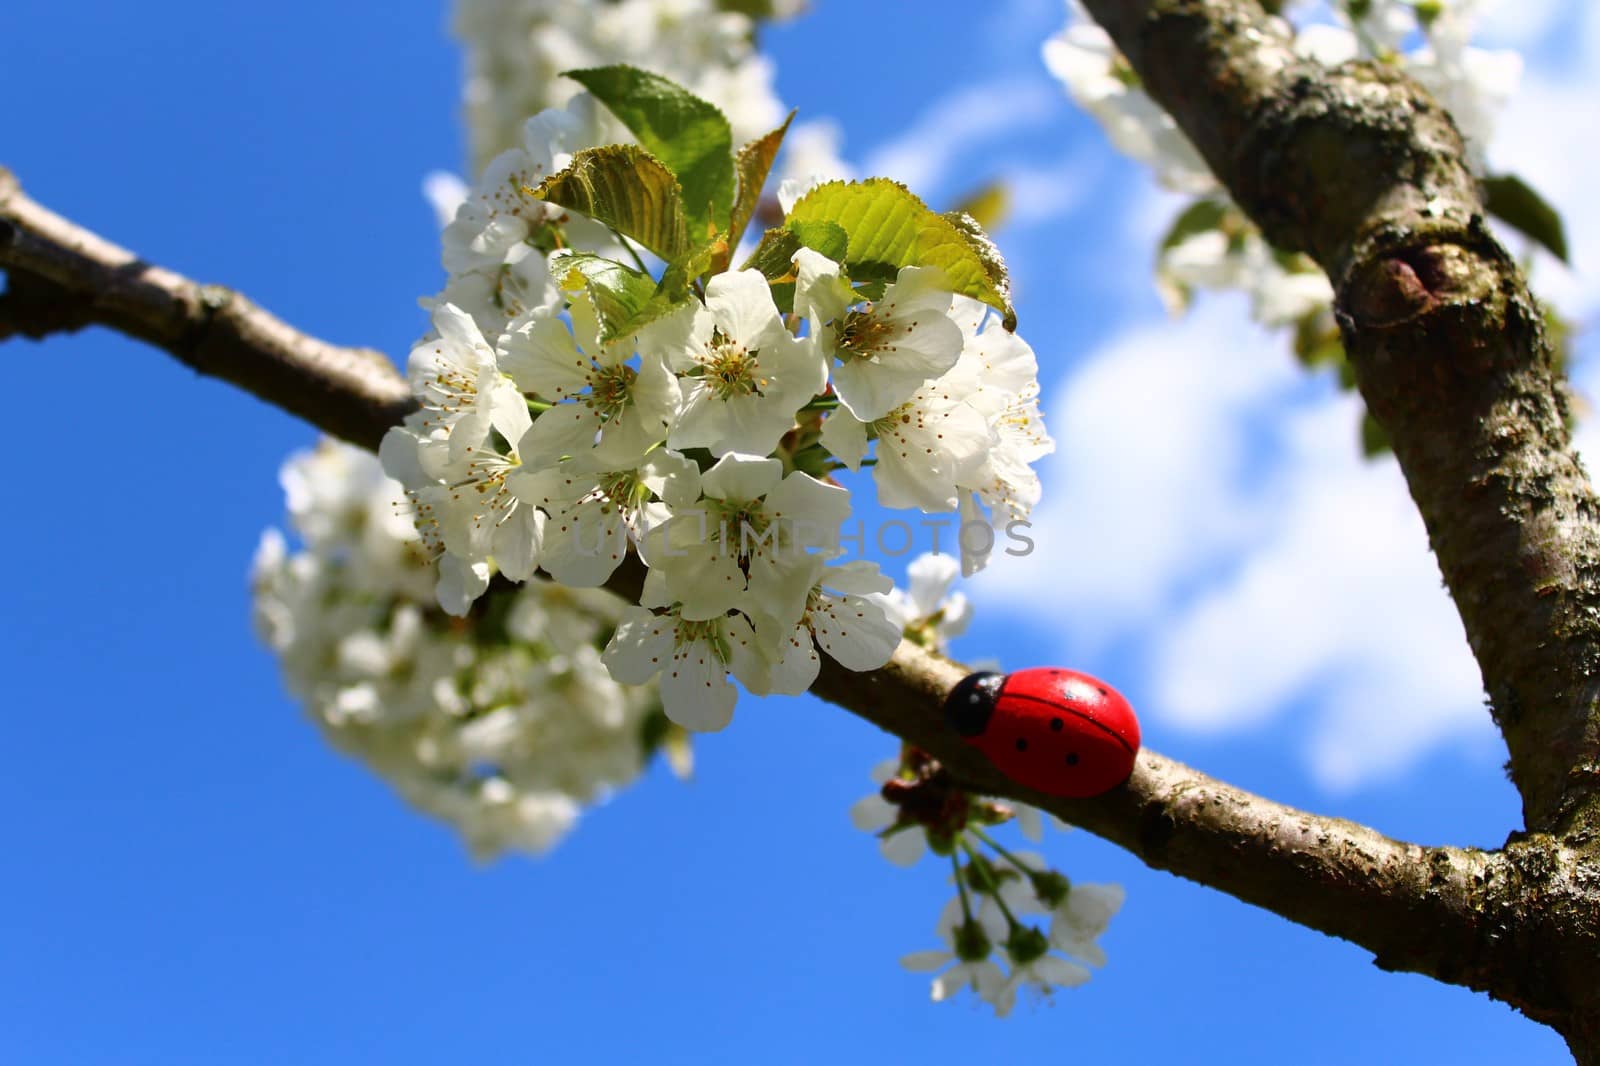 ladybug on a blooming cherry tree by martina_unbehauen